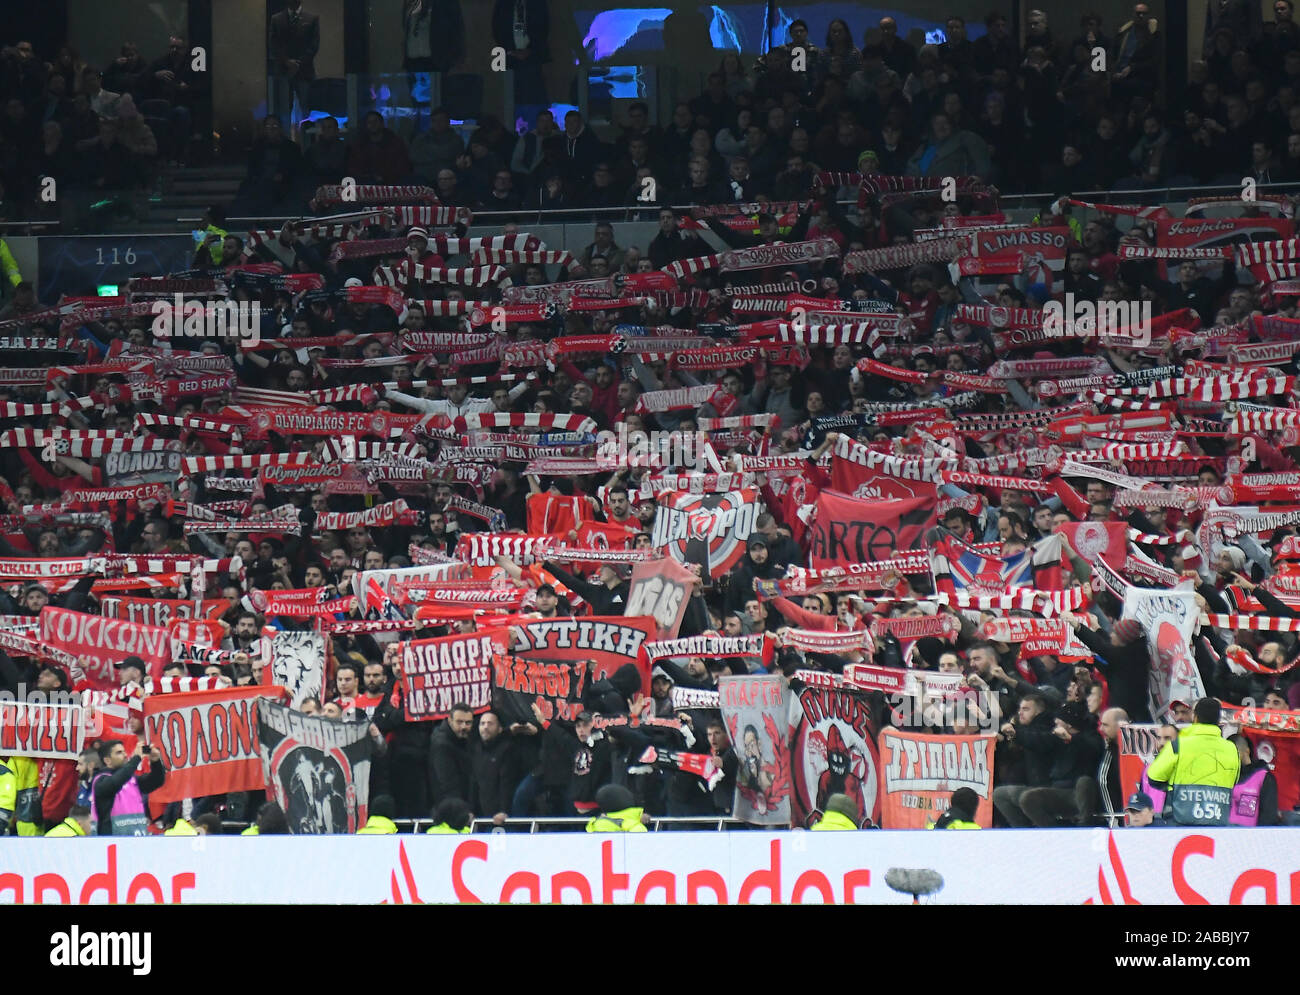 LONDON, ENGLAND - NOVEMBER 26, 2019: Olympiacos fans pictured during the 2019/20 UEFA Champions League Group B game between Tottenham Hotspur FC (England) and Olympiacos FC (Greece) at Tottenham Hotspur Stadium. Stock Photo